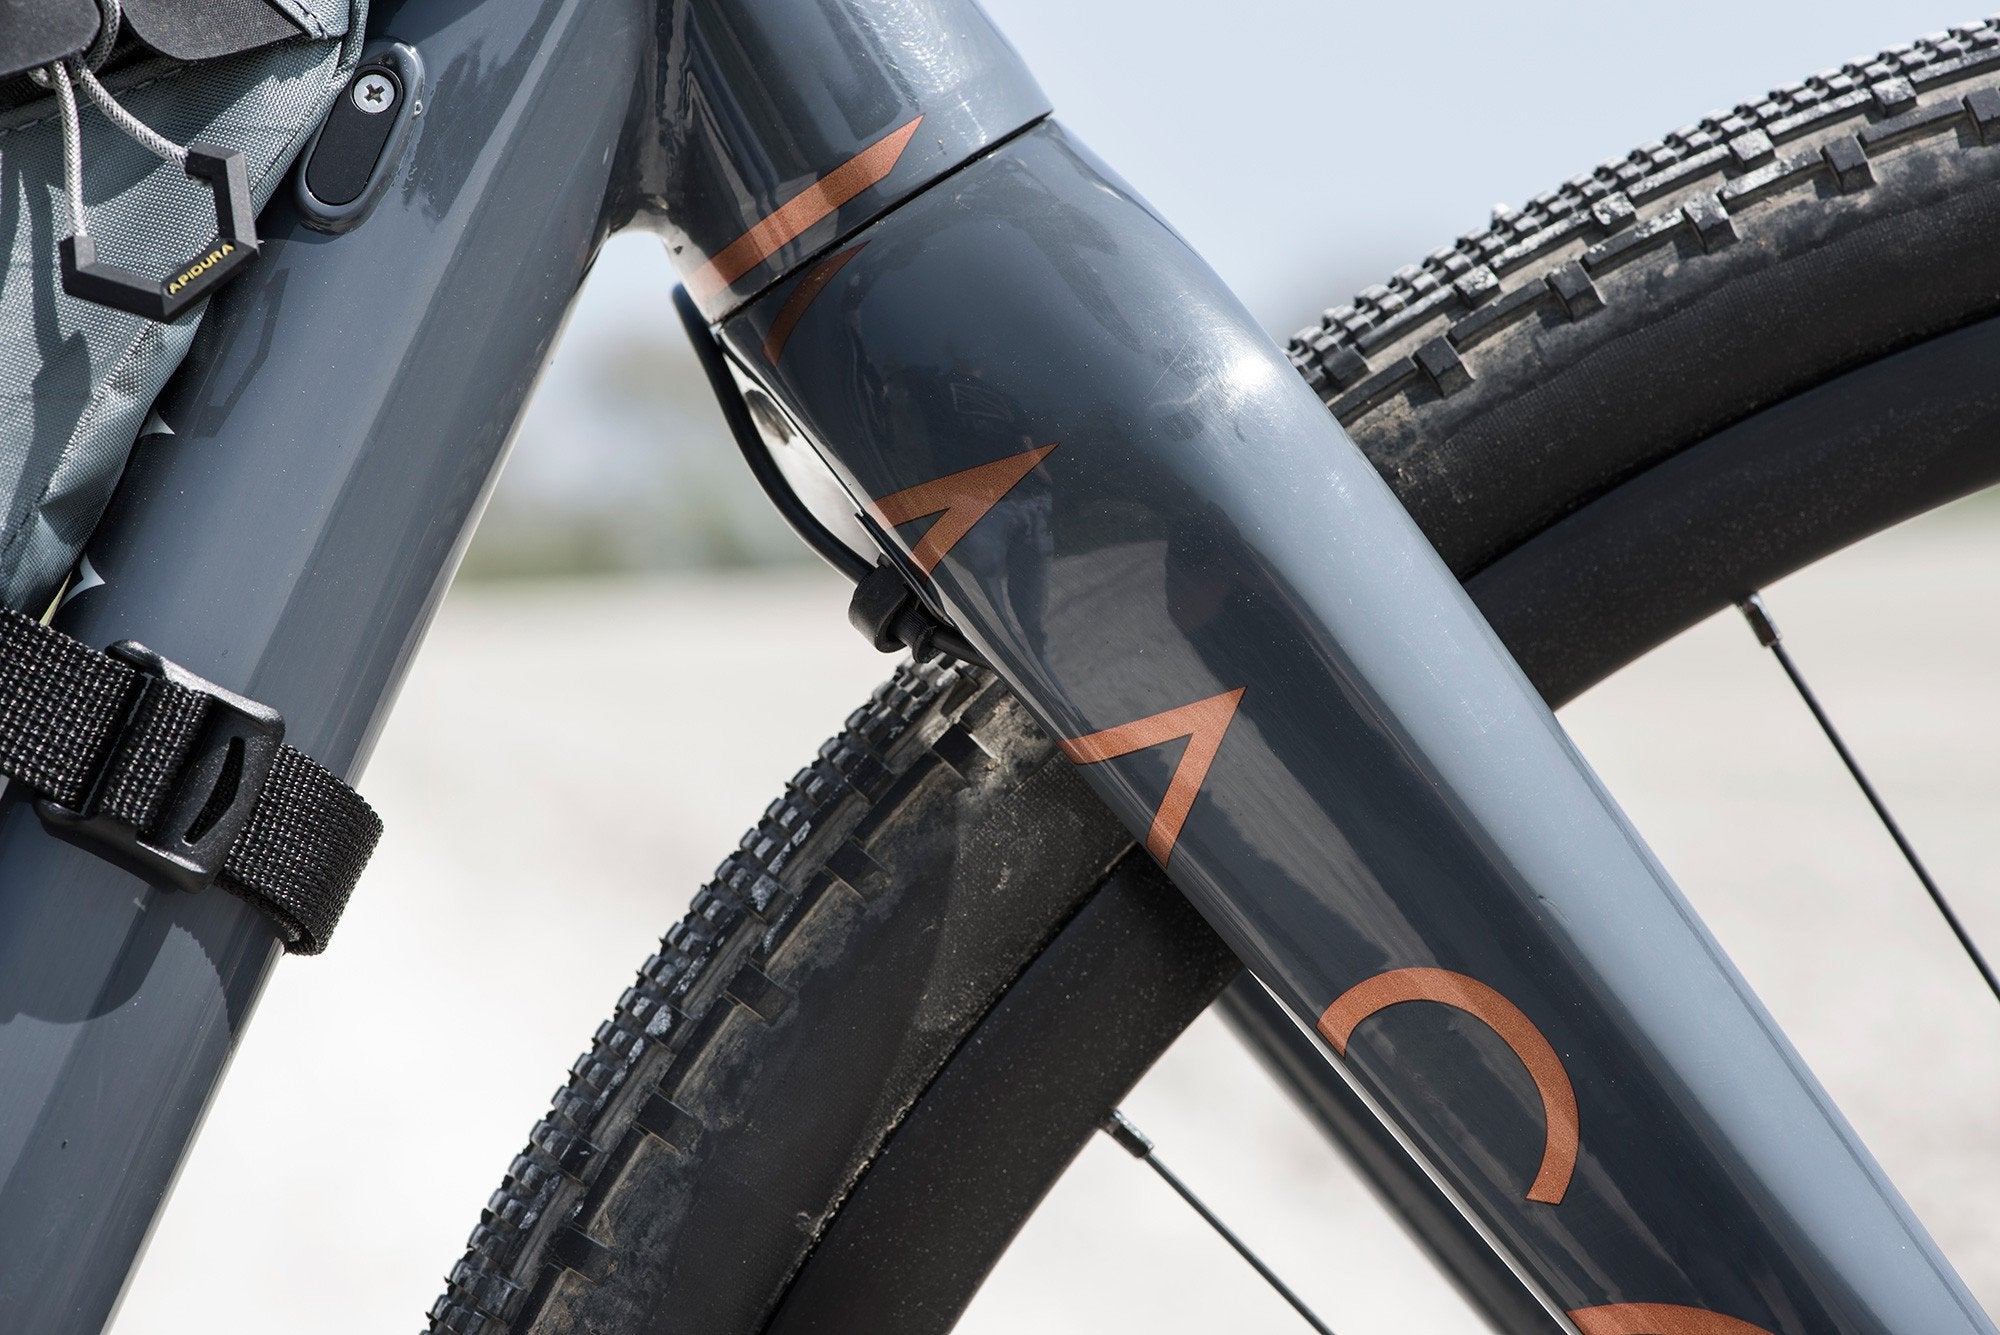 <h1>Tyres</h1><i>At HUNT, we enjoy the puncture resistance and grip benefits of tubeless on our every-day rides so we wanted to allow our customers the same option. Of course, all of our tubeless-ready wheels are designed to work perfectly with clincher tyres and inner tubes too.</i>